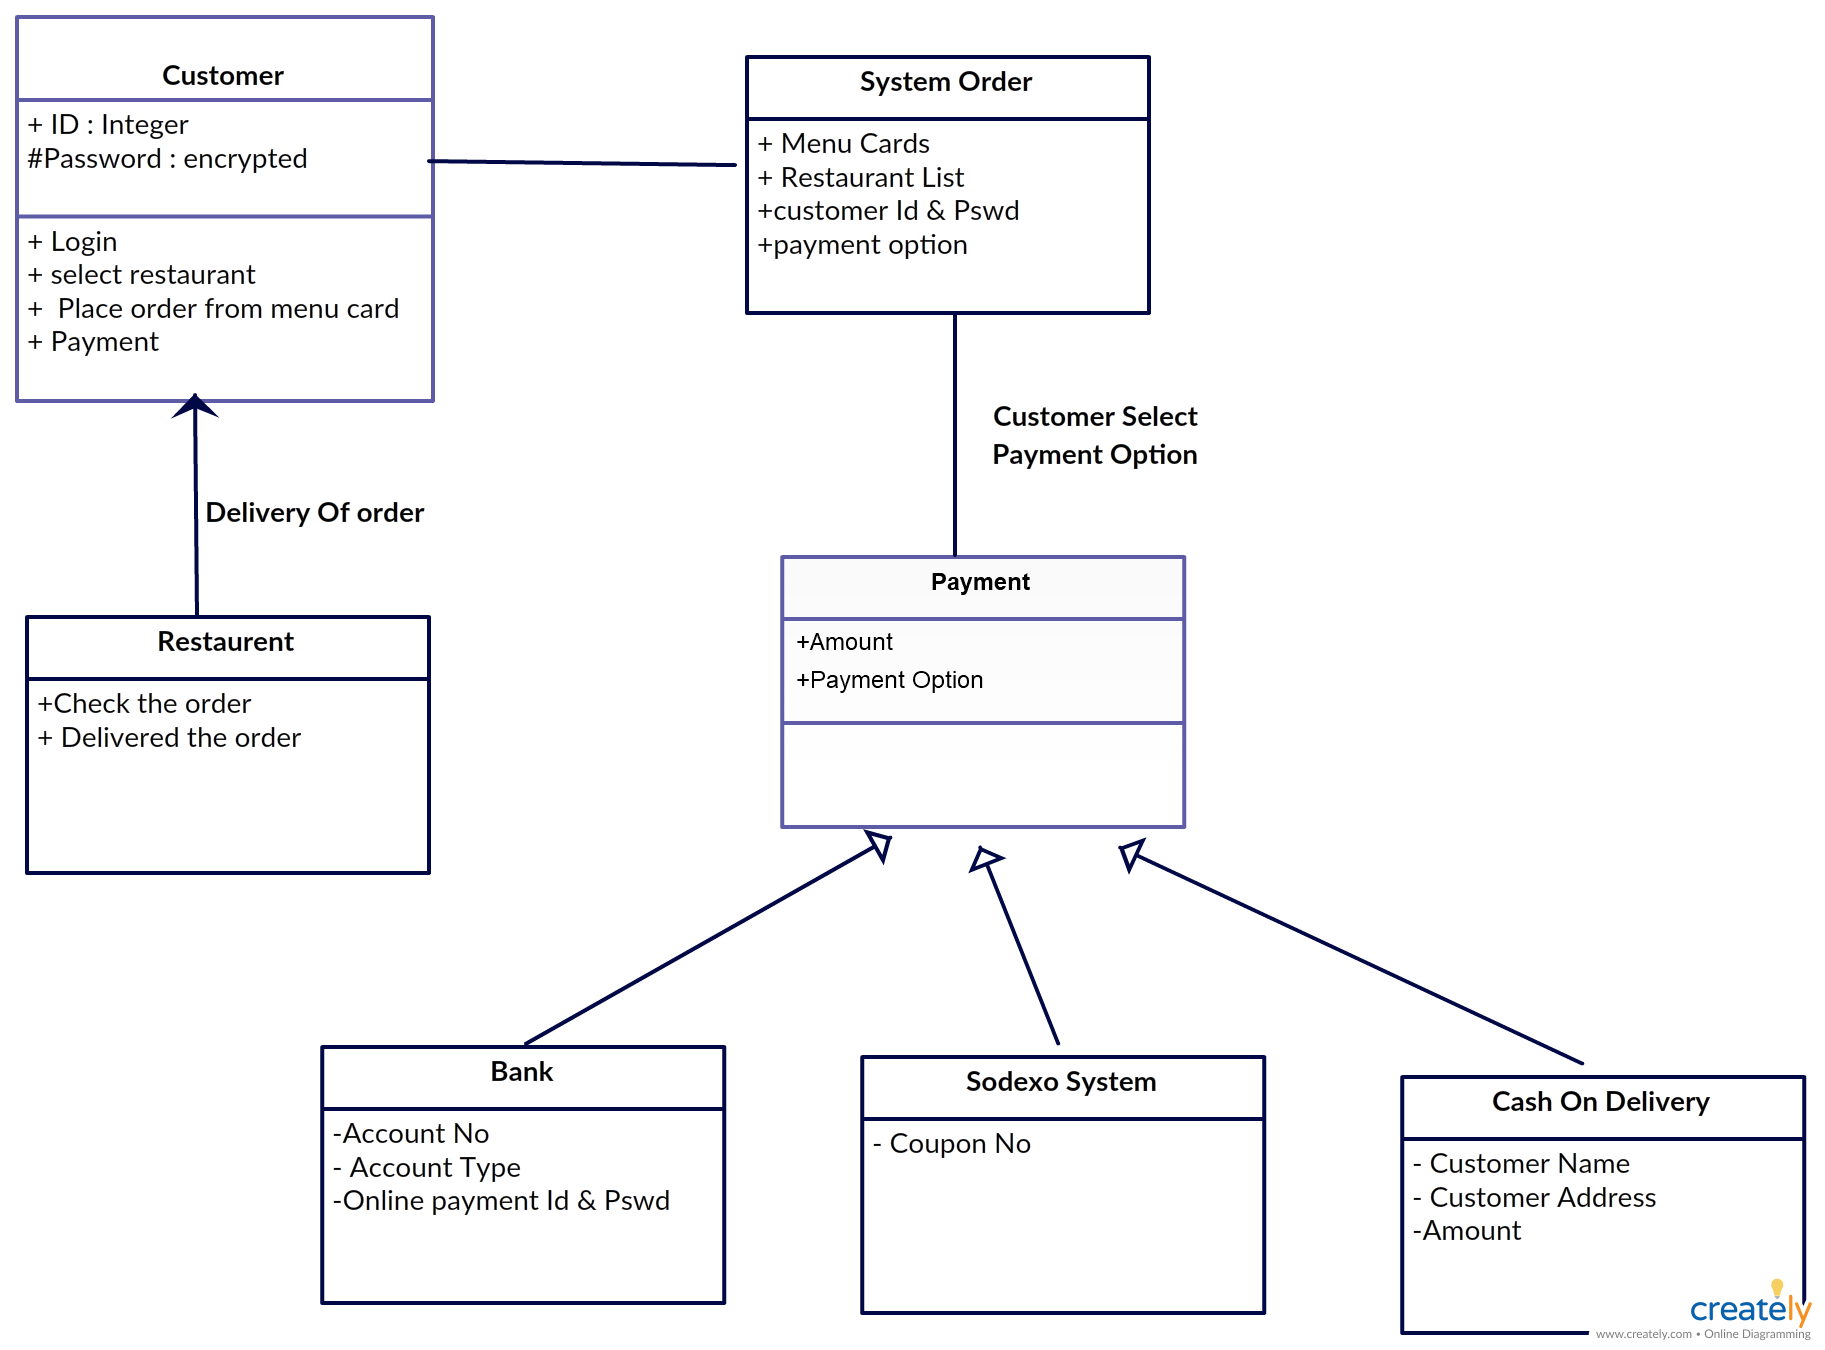 Uml Class Diagram For Online Food Ordering System You Can Modify This According To The System Structure Of Your En Class Diagram Online Food Data Flow Diagram